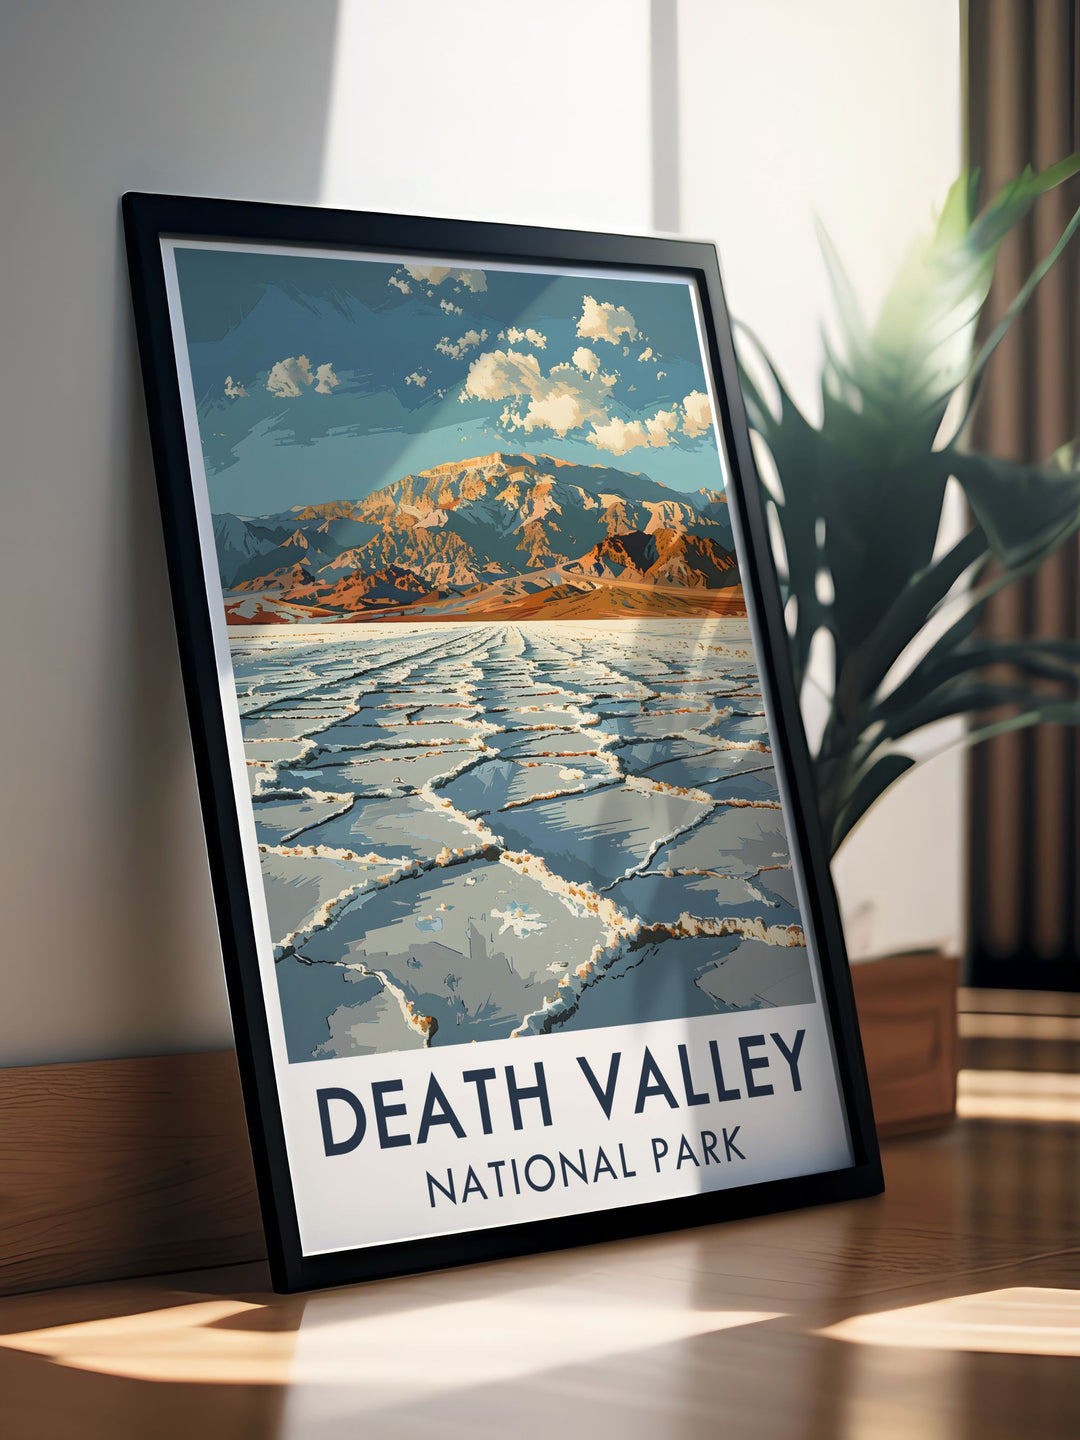 Framed art showcasing the serene beauty of Badwater Basin in Death Valley, capturing the otherworldly landscape and the parks natural splendor.